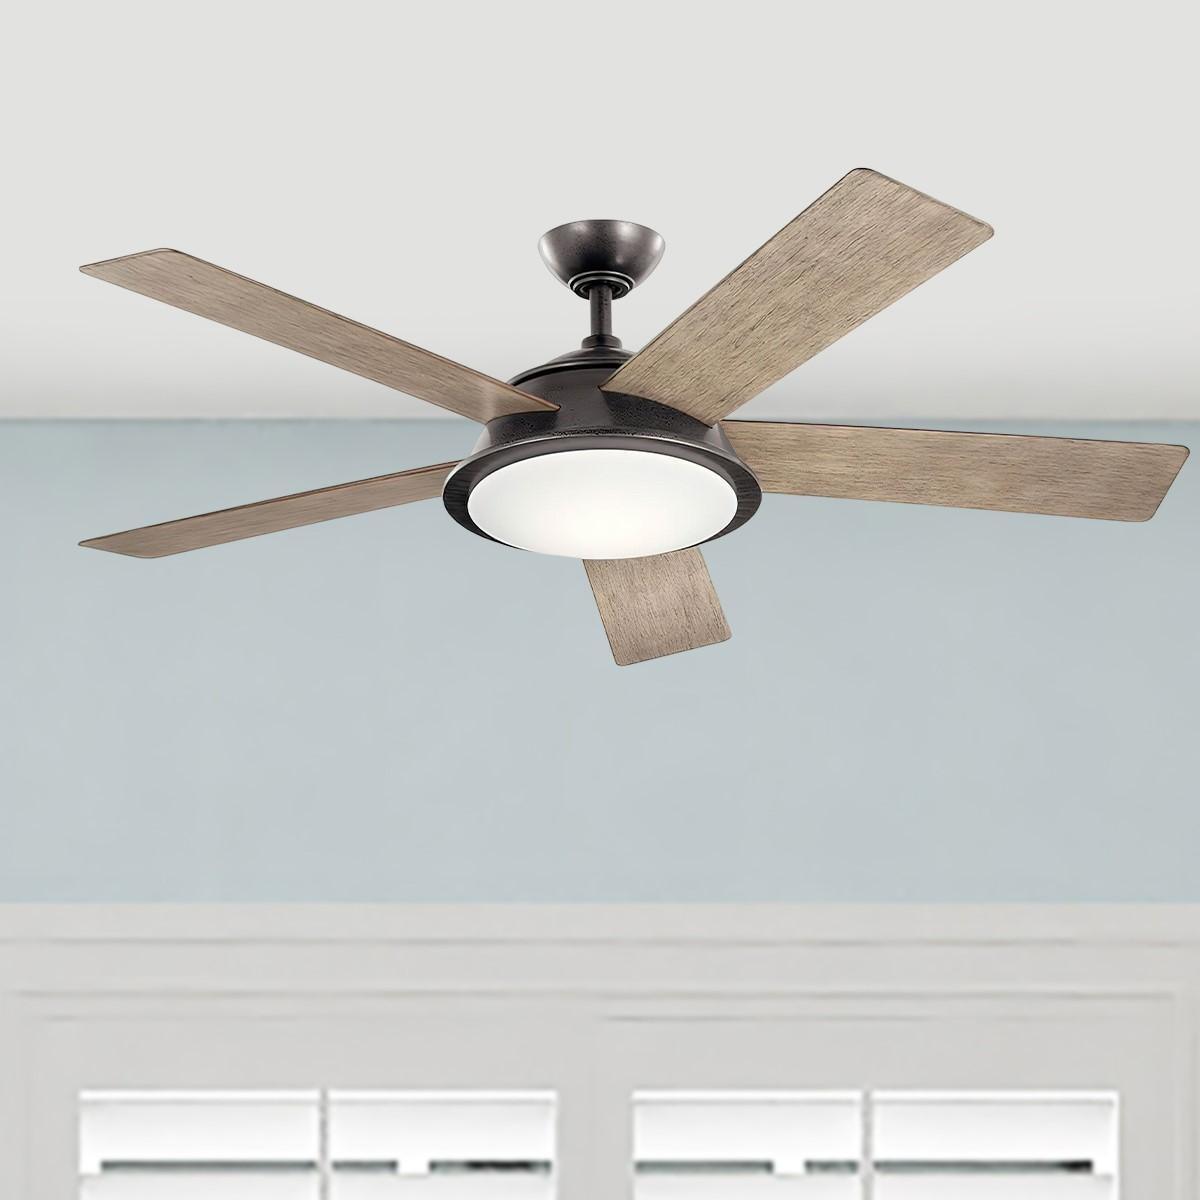 Verdi 56 Inch Coastal Indoor/Outdoor Ceiling Fan With Light And Remote